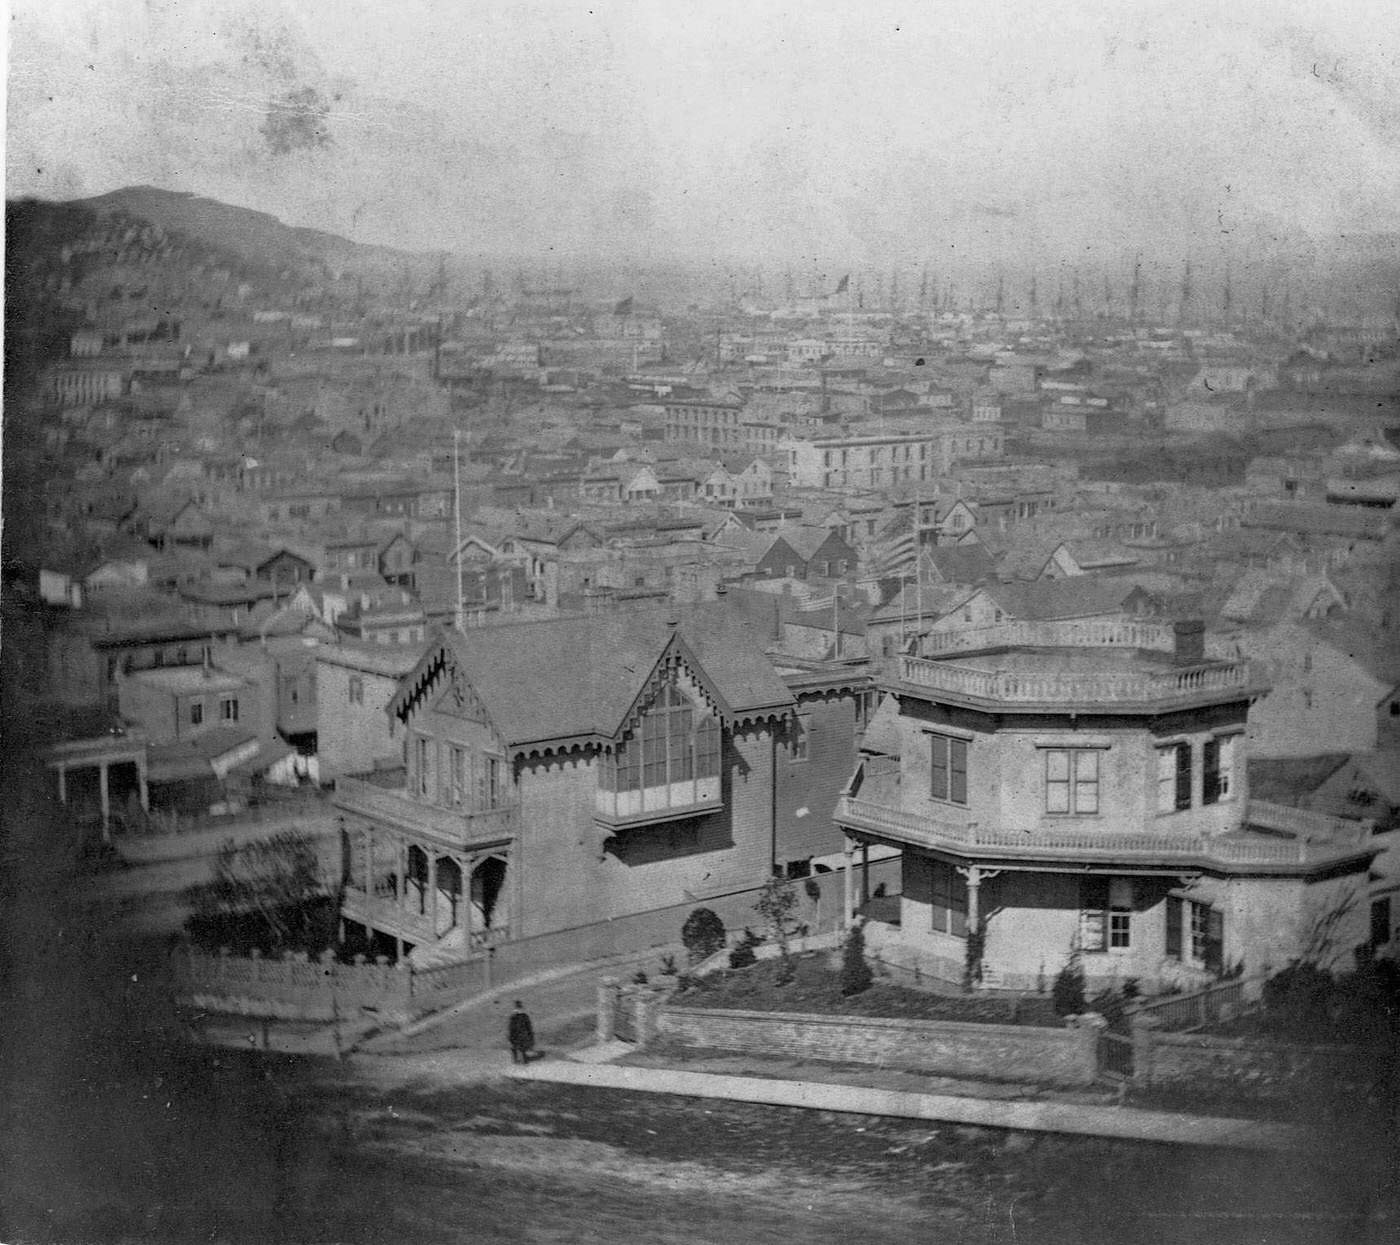 Victorian Houses on San Francisco's Rincon Hill Have View of City Below, 1850s